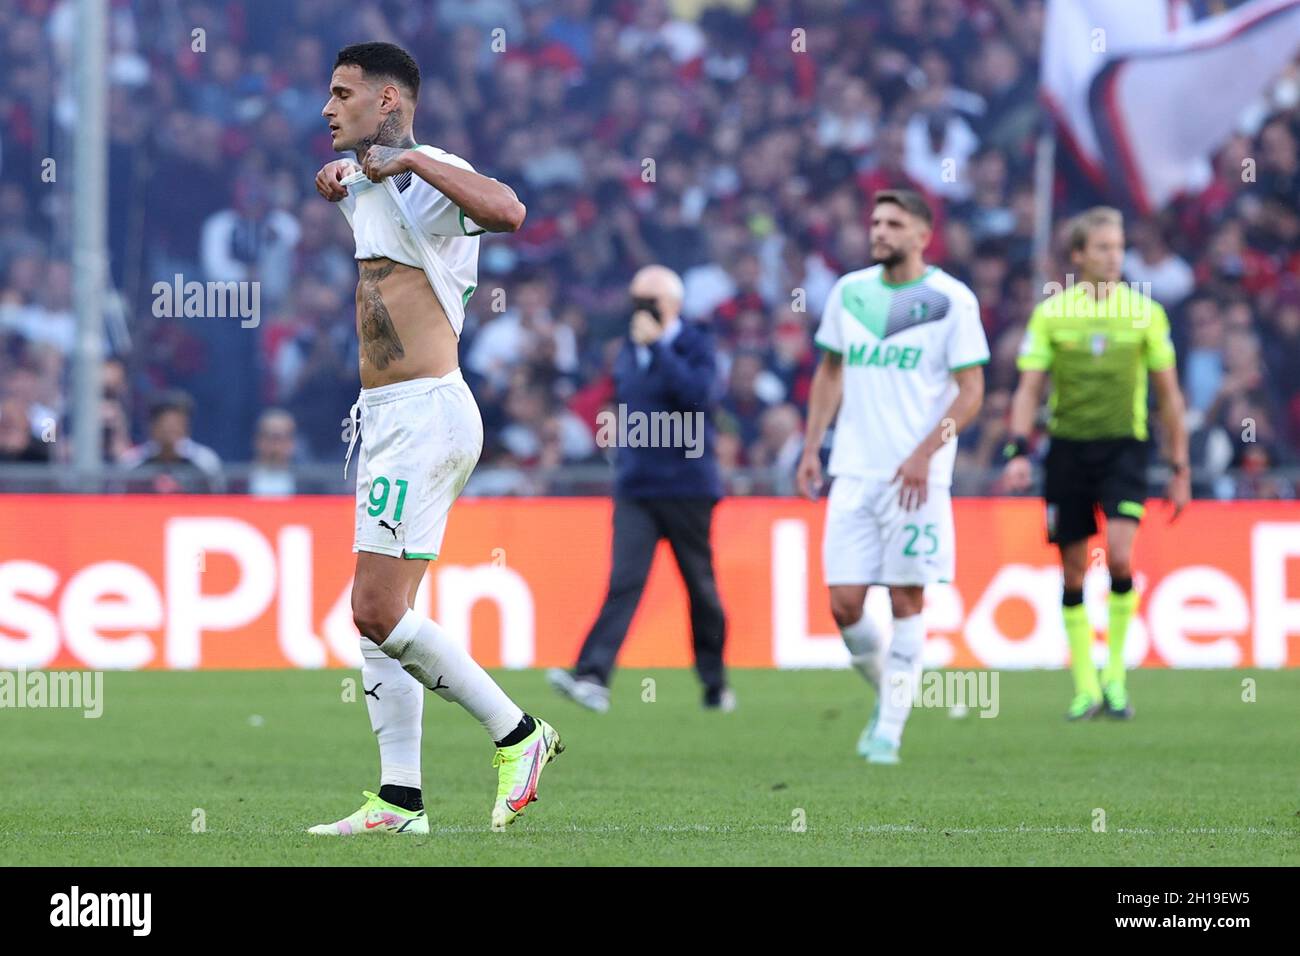 Luigi Ferraris stadium, Genova, Italy, October 17, 2021, Gianluca Scamacca (U.S. Sassuolo) leaves the pitch after being substituted  during  Genoa CFC vs US Sassuolo - Italian football Serie A match Stock Photo